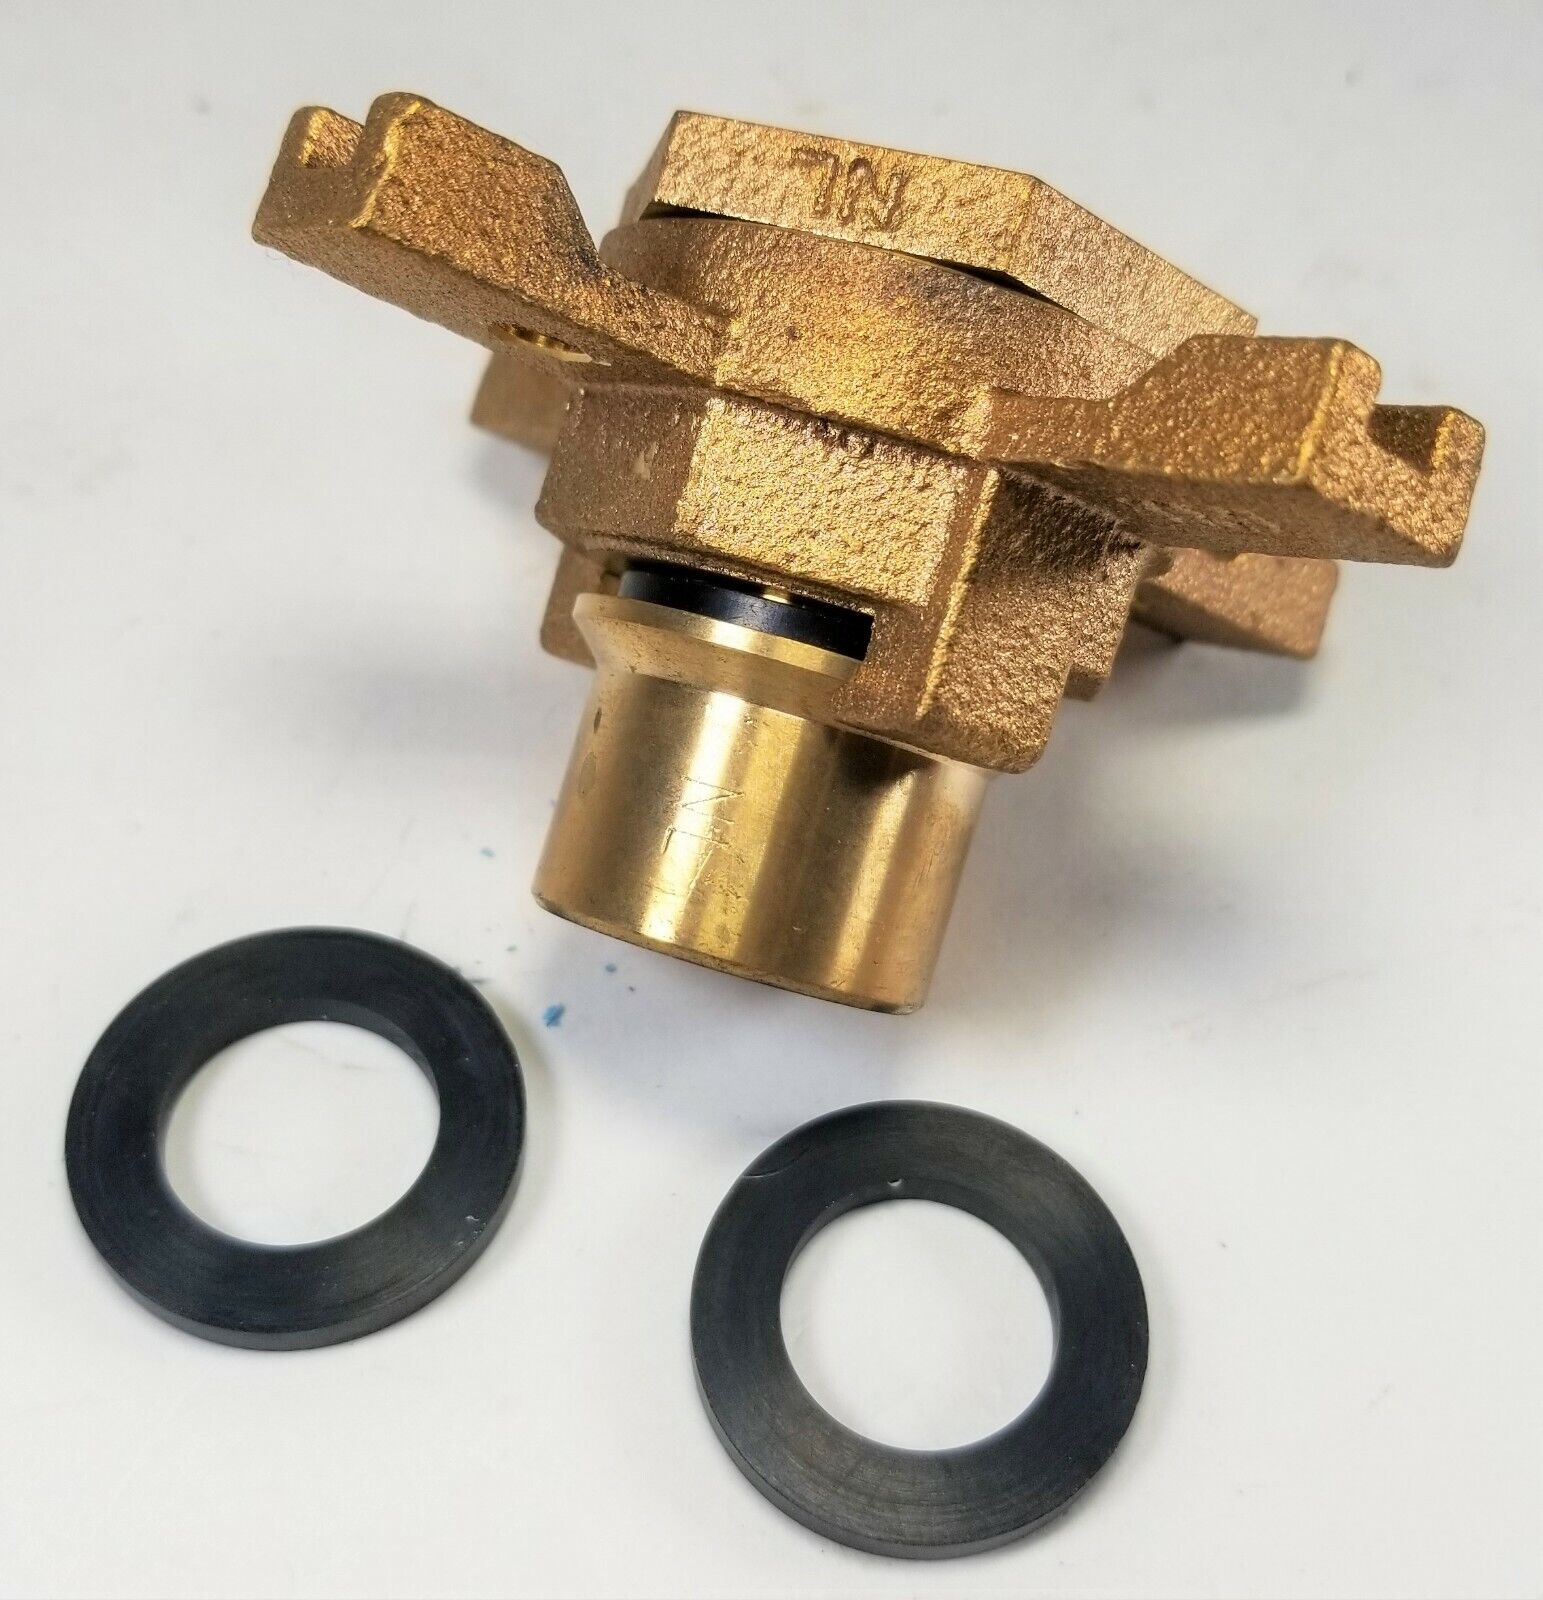 10 - Water Meter Yoke Expansion Connection Wheel for 5/8" x 1/2" Meter, NL Brass Trumbull 368-0630 - фотография #2